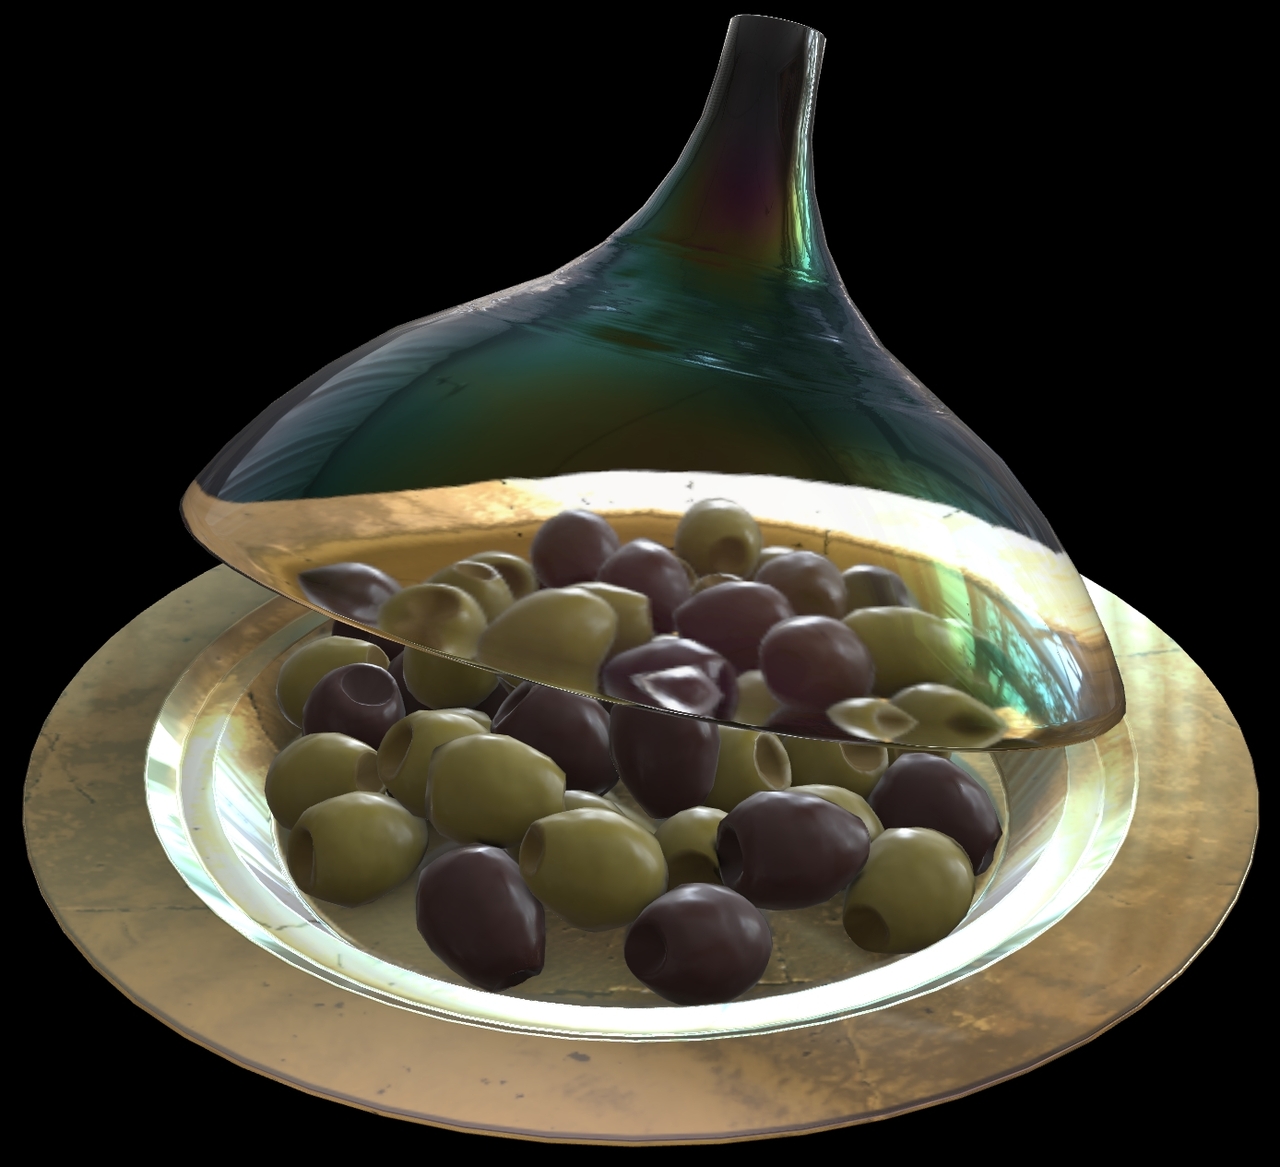 Iridescent Dish with Olives